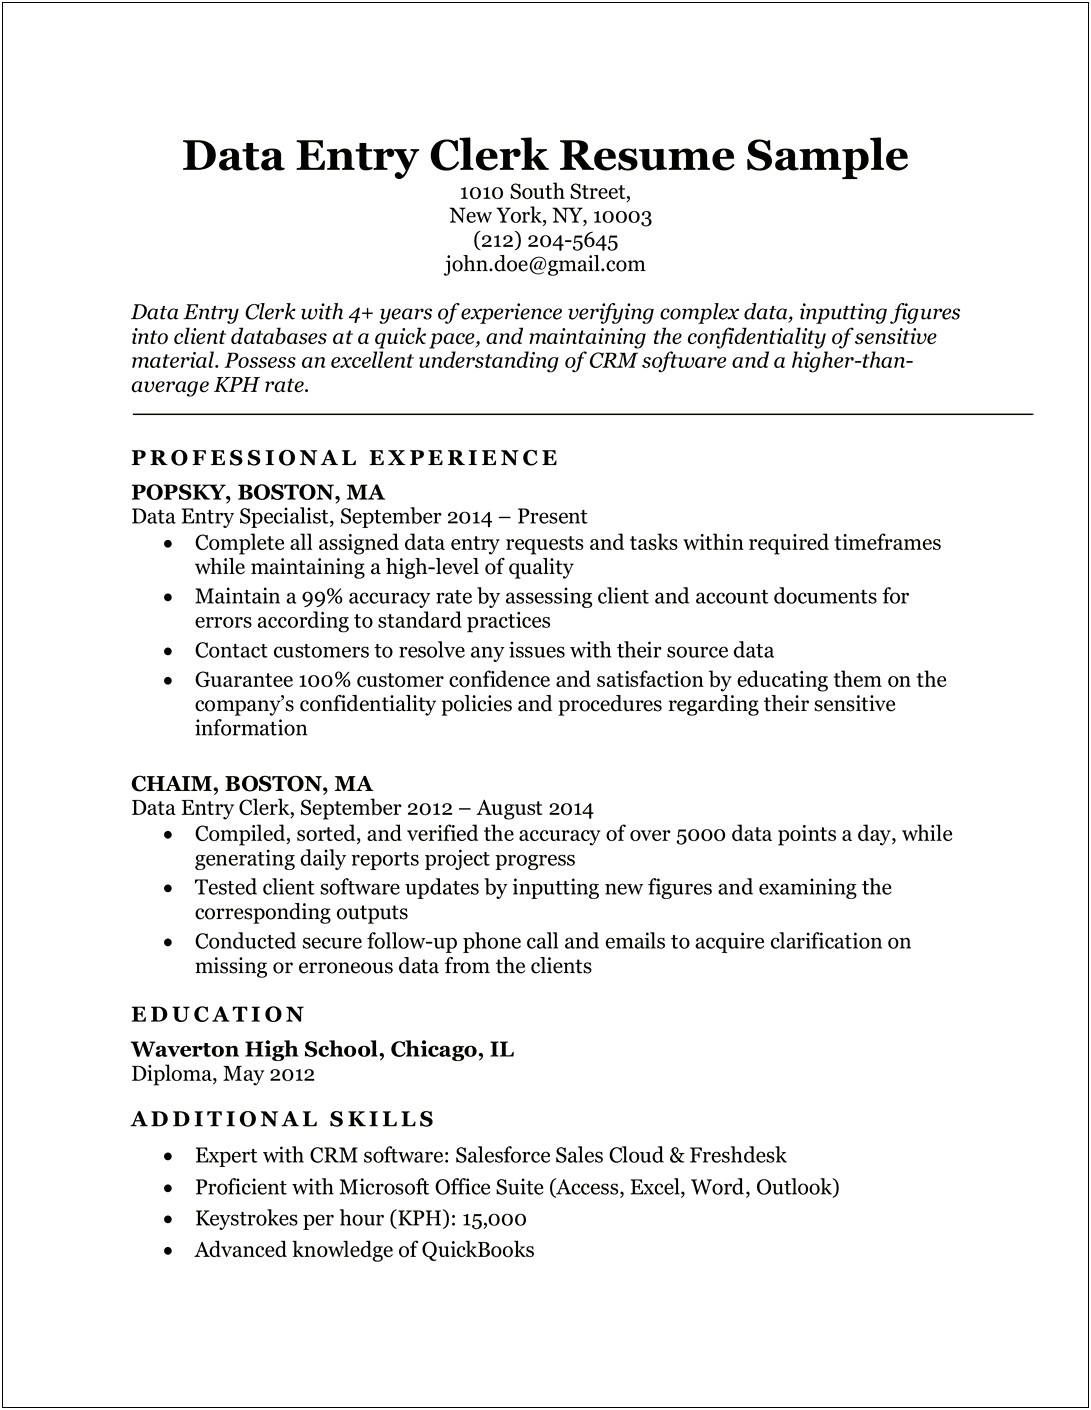 Resume Objective Examples No Experience